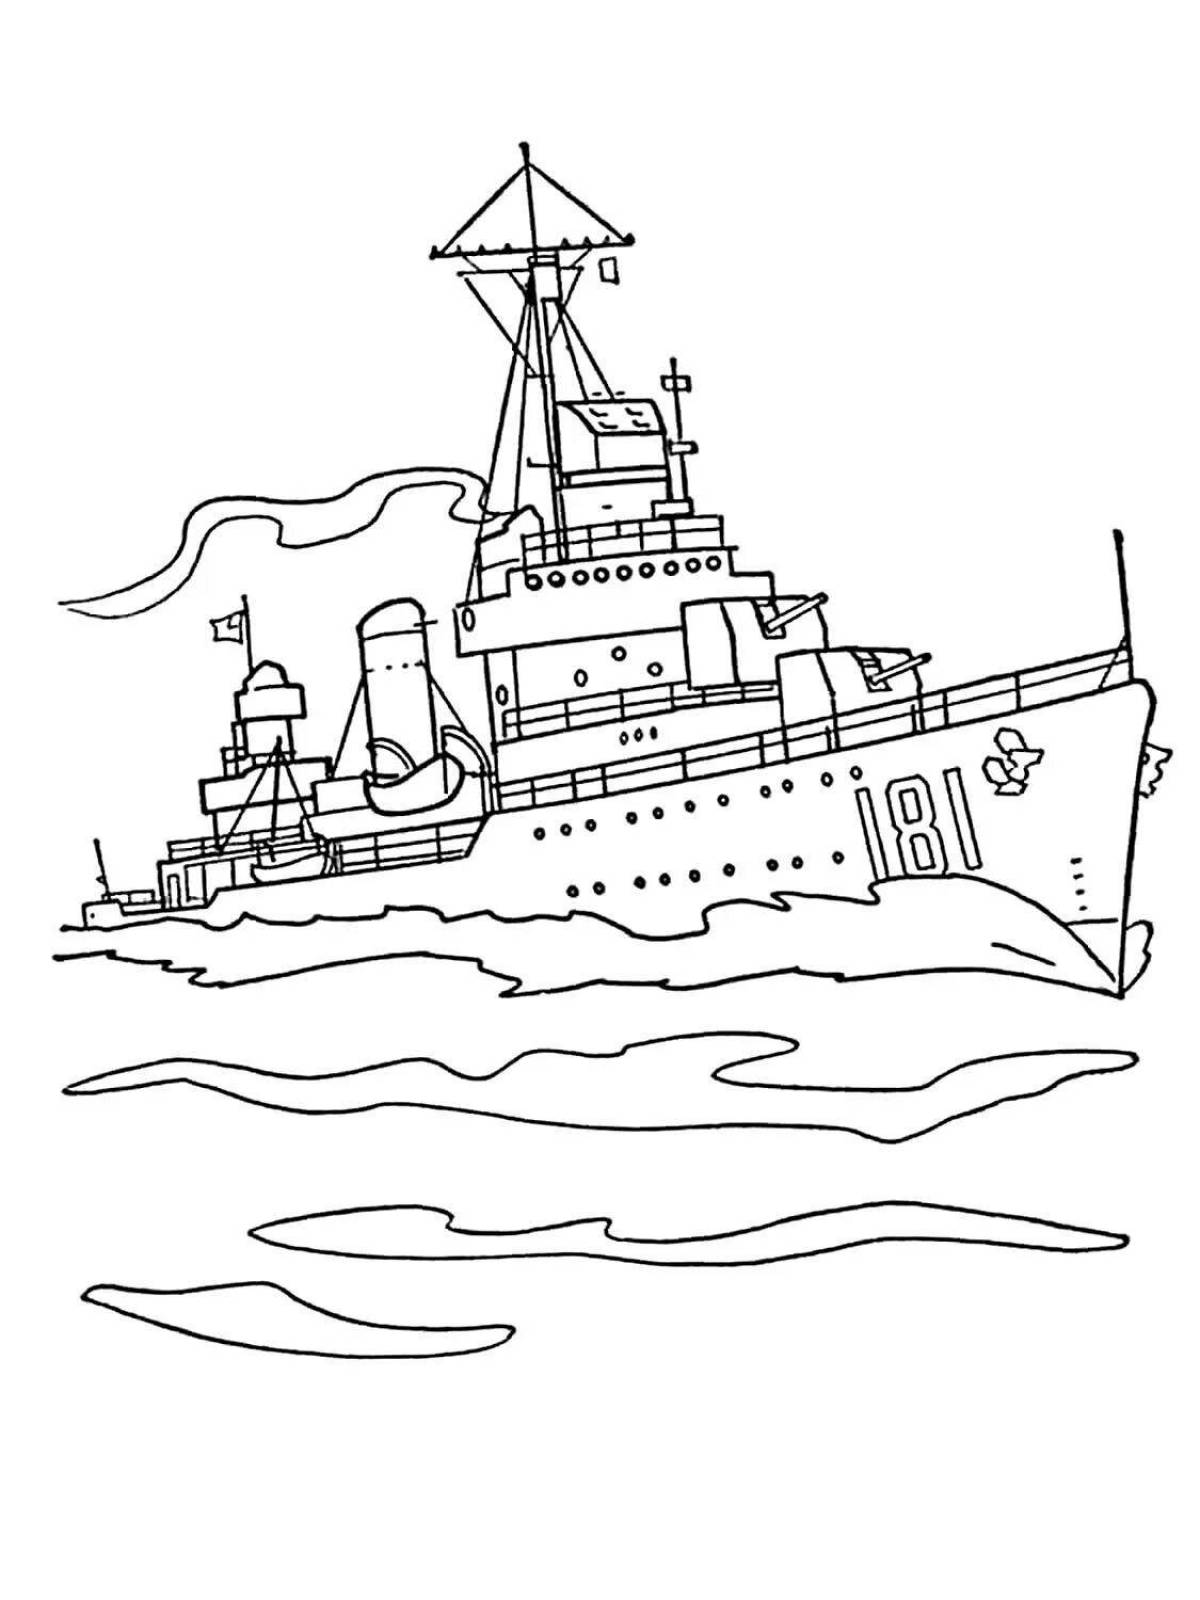 Colorfully illustrated warship coloring page